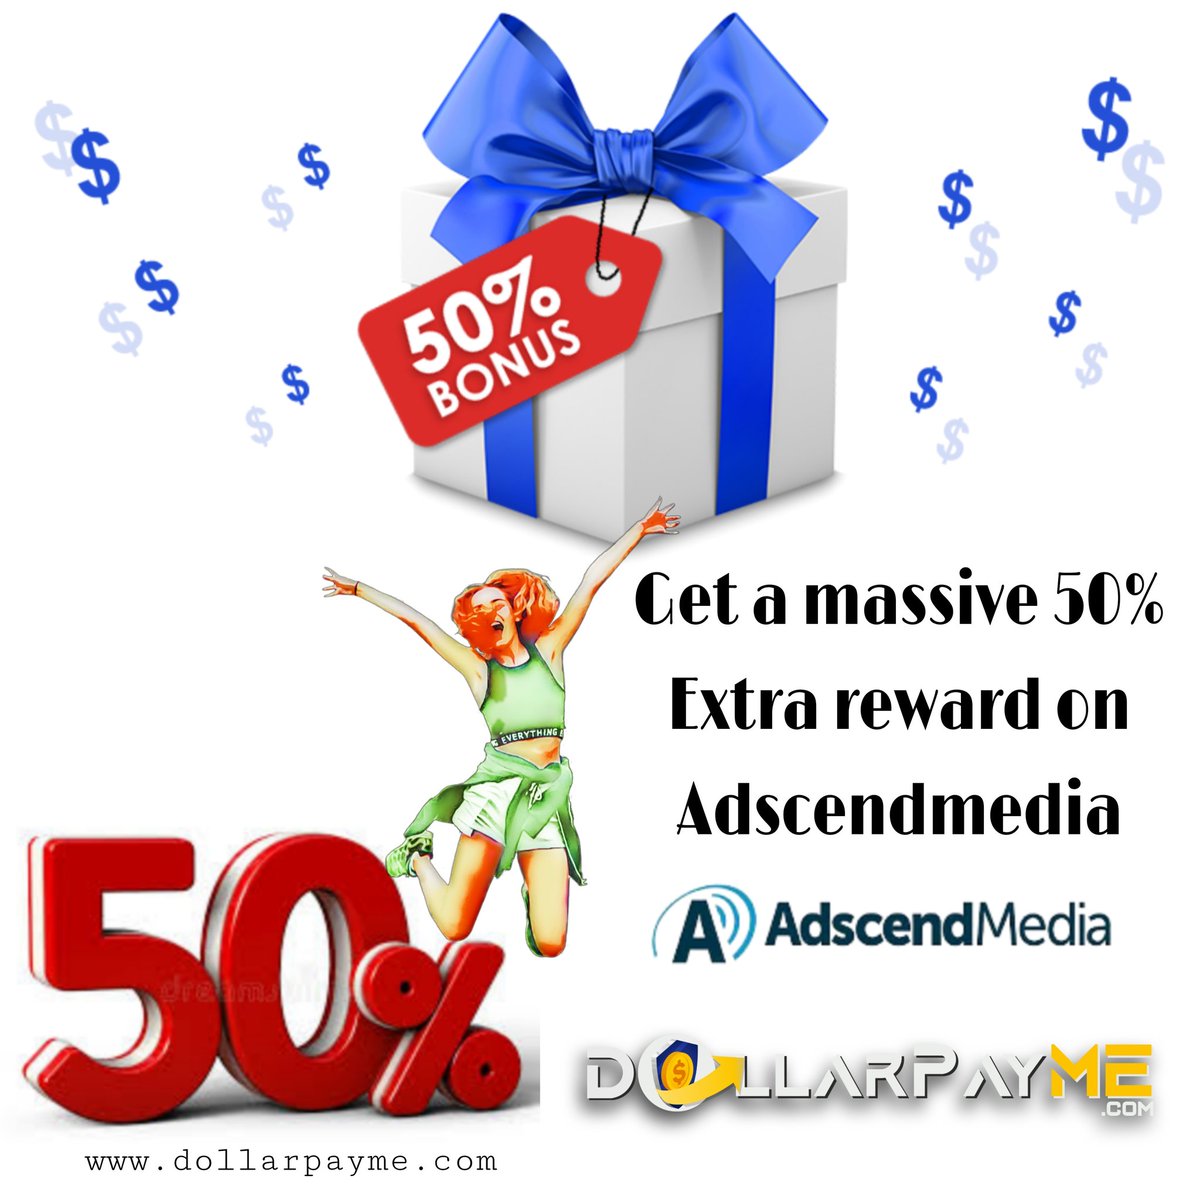 Everyone DollarPayme Team Members We are offering 50% extra rewards on all completions via AdscendMedia today. Make the most of it here: dollarpayme.com/AdscendMedia This offer has been started from today. #paidsurveys #makemoneyonline #getpaidextra #dollarpayme